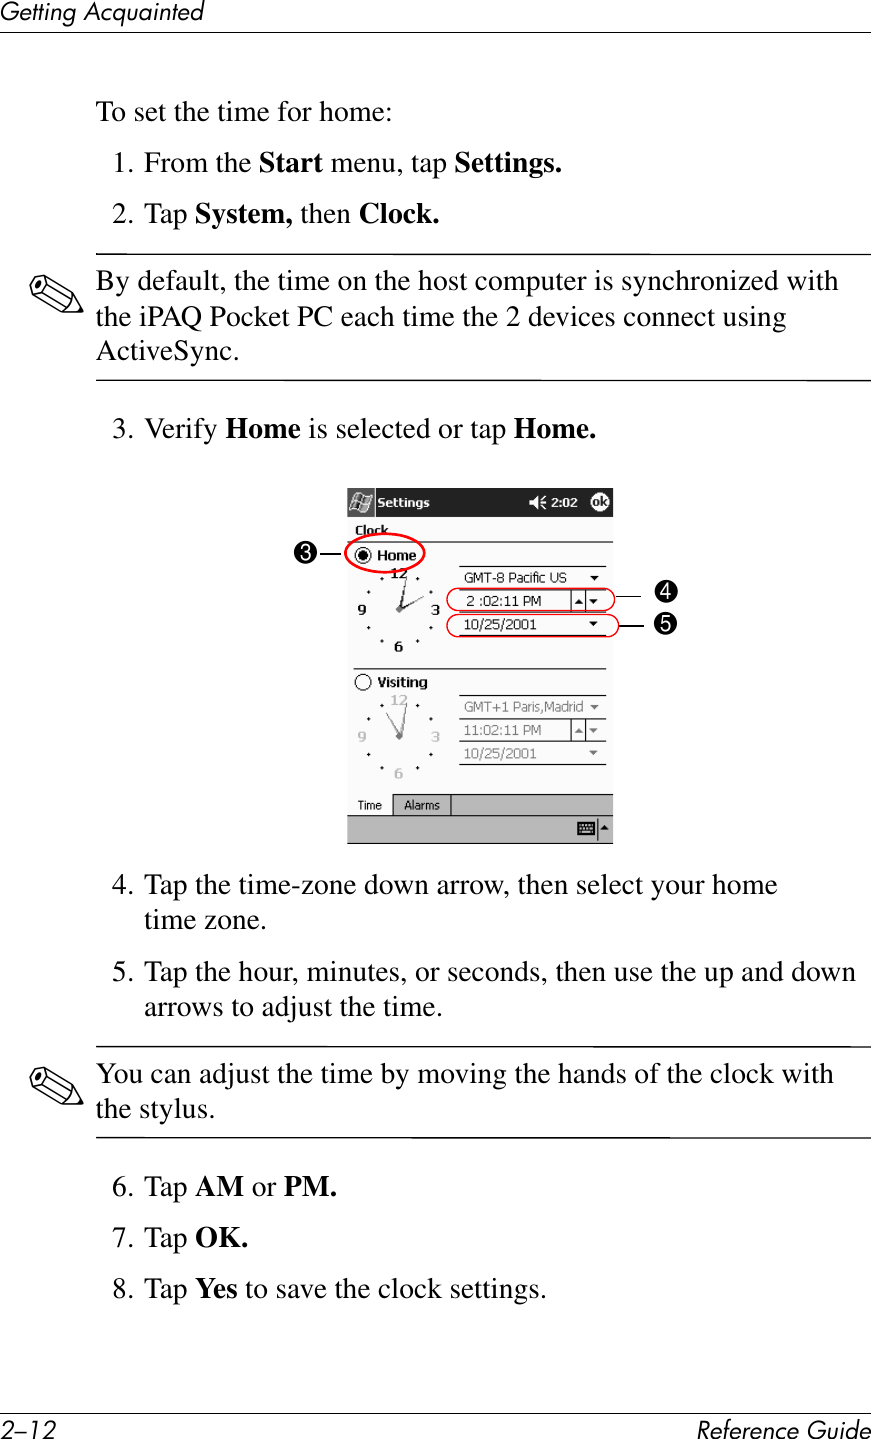 0/.0 !&quot;#&quot;$&quot;%&amp;&quot;&apos;()*+&quot;(&quot;11*%2&apos;&lt;&amp;T)4*%1&quot;+To set the time for home:1. From the Start menu, tap Settings.2. Tap System, then Clock.✎By default, the time on the host computer is synchronized with the iPAQ Pocket PC each time the 2 devices connect using ActiveSync.3. Verify Home is selected or tap Home.4. Tap the time-zone down arrow, then select your home time zone.5. Tap the hour, minutes, or seconds, then use the up and down arrows to adjust the time.✎You can adjust the time by moving the hands of the clock with the stylus.6. Tap AM or PM.7. Tap OK.8. Tap Ye s  to save the clock settings.345